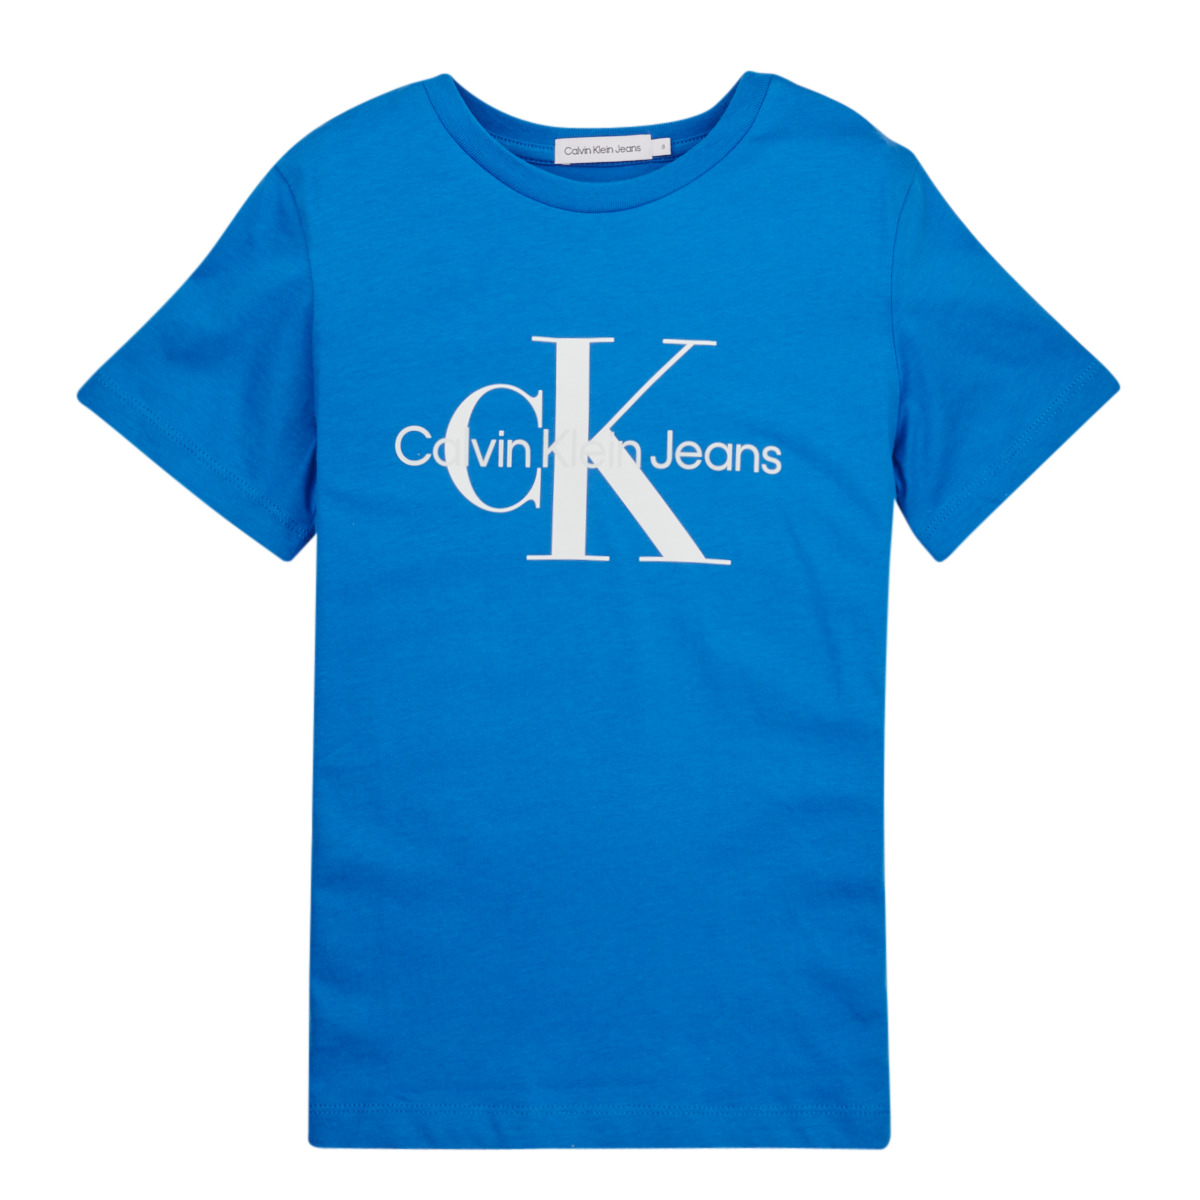 Calvin Klein Jeans MONOGRAM LOGO T-SHIRT Blue - Free delivery | Spartoo NET  ! - Clothing short-sleeved t-shirts Child | T-Shirts